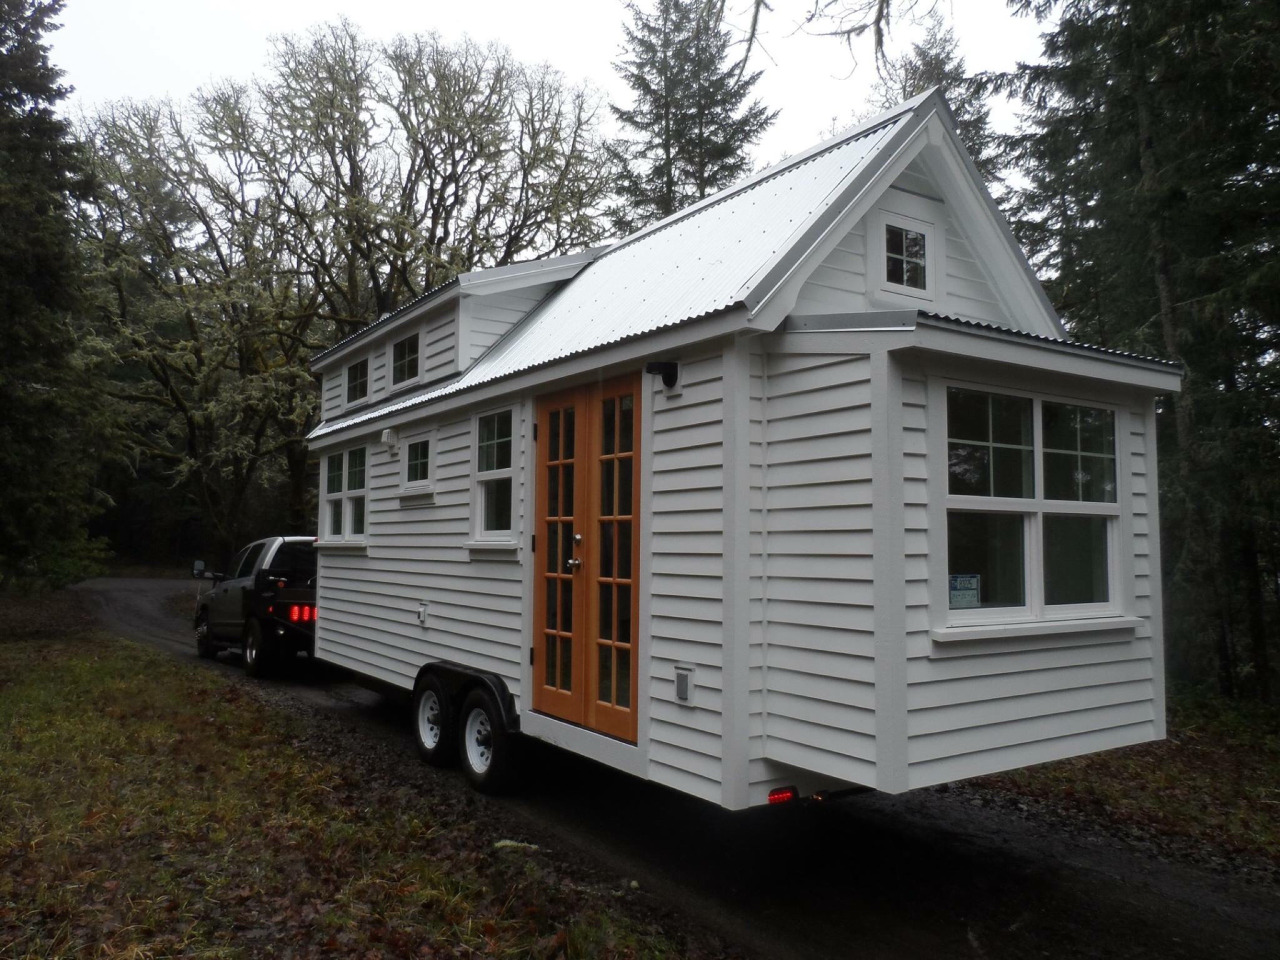  TINY  HOUSE  TOWN The Ynez From The Oregon  Cottage Company